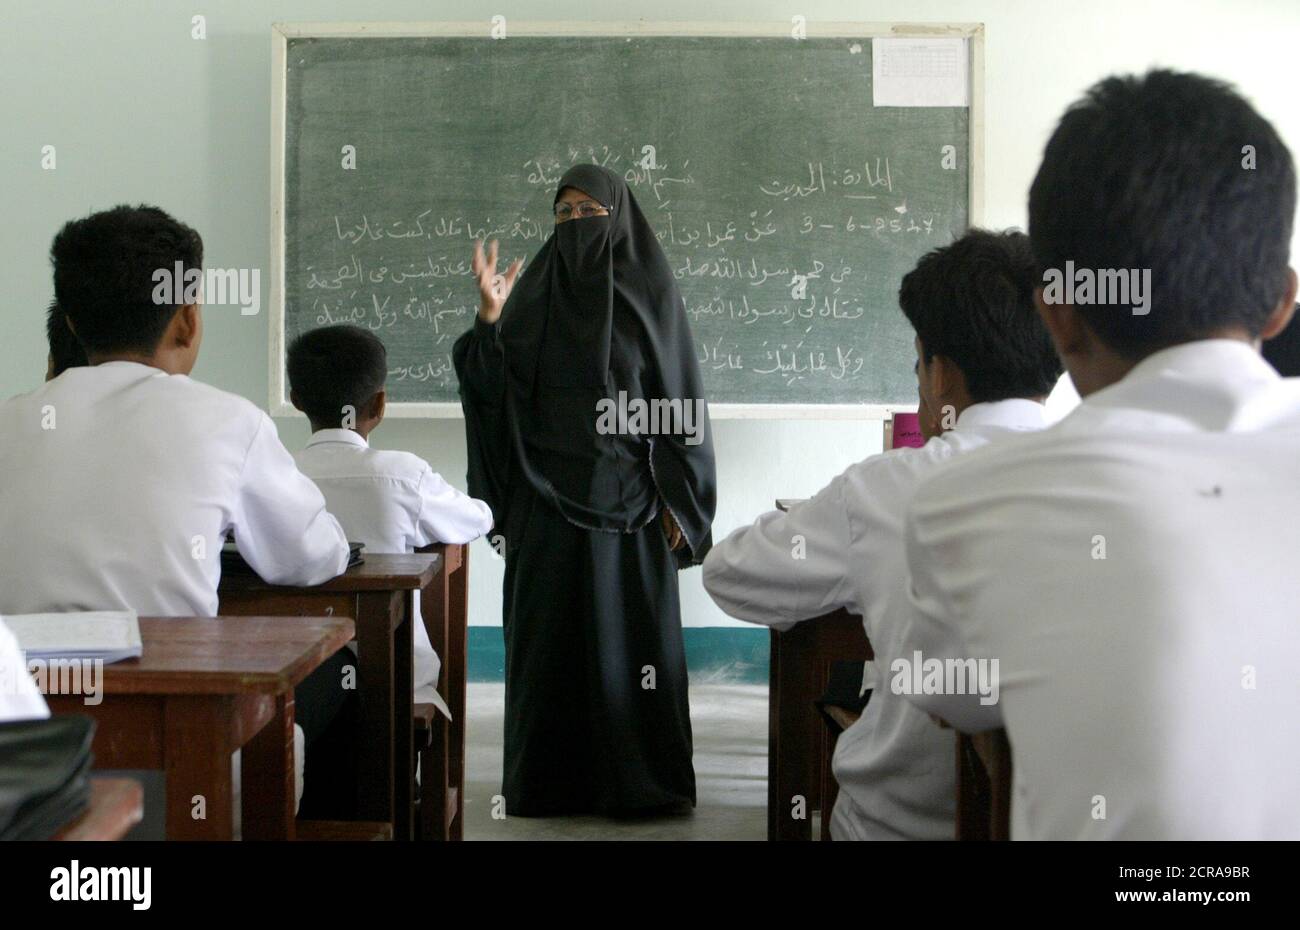 A Muslim woman teaches Thai students at a Muslim religious school in Narathiwat province, 1,200 km (750 miles) south of Bangkok on June 4, 2004. After five months of violence that has killed more than 200 people, Thailand is still groping to find the cause and develop a strategy to end the unrest in its mainly Muslim south, analysts say. Picture taken June 4, 2004. REUTERS/Sukree Sukplang  SS/TW Stock Photo